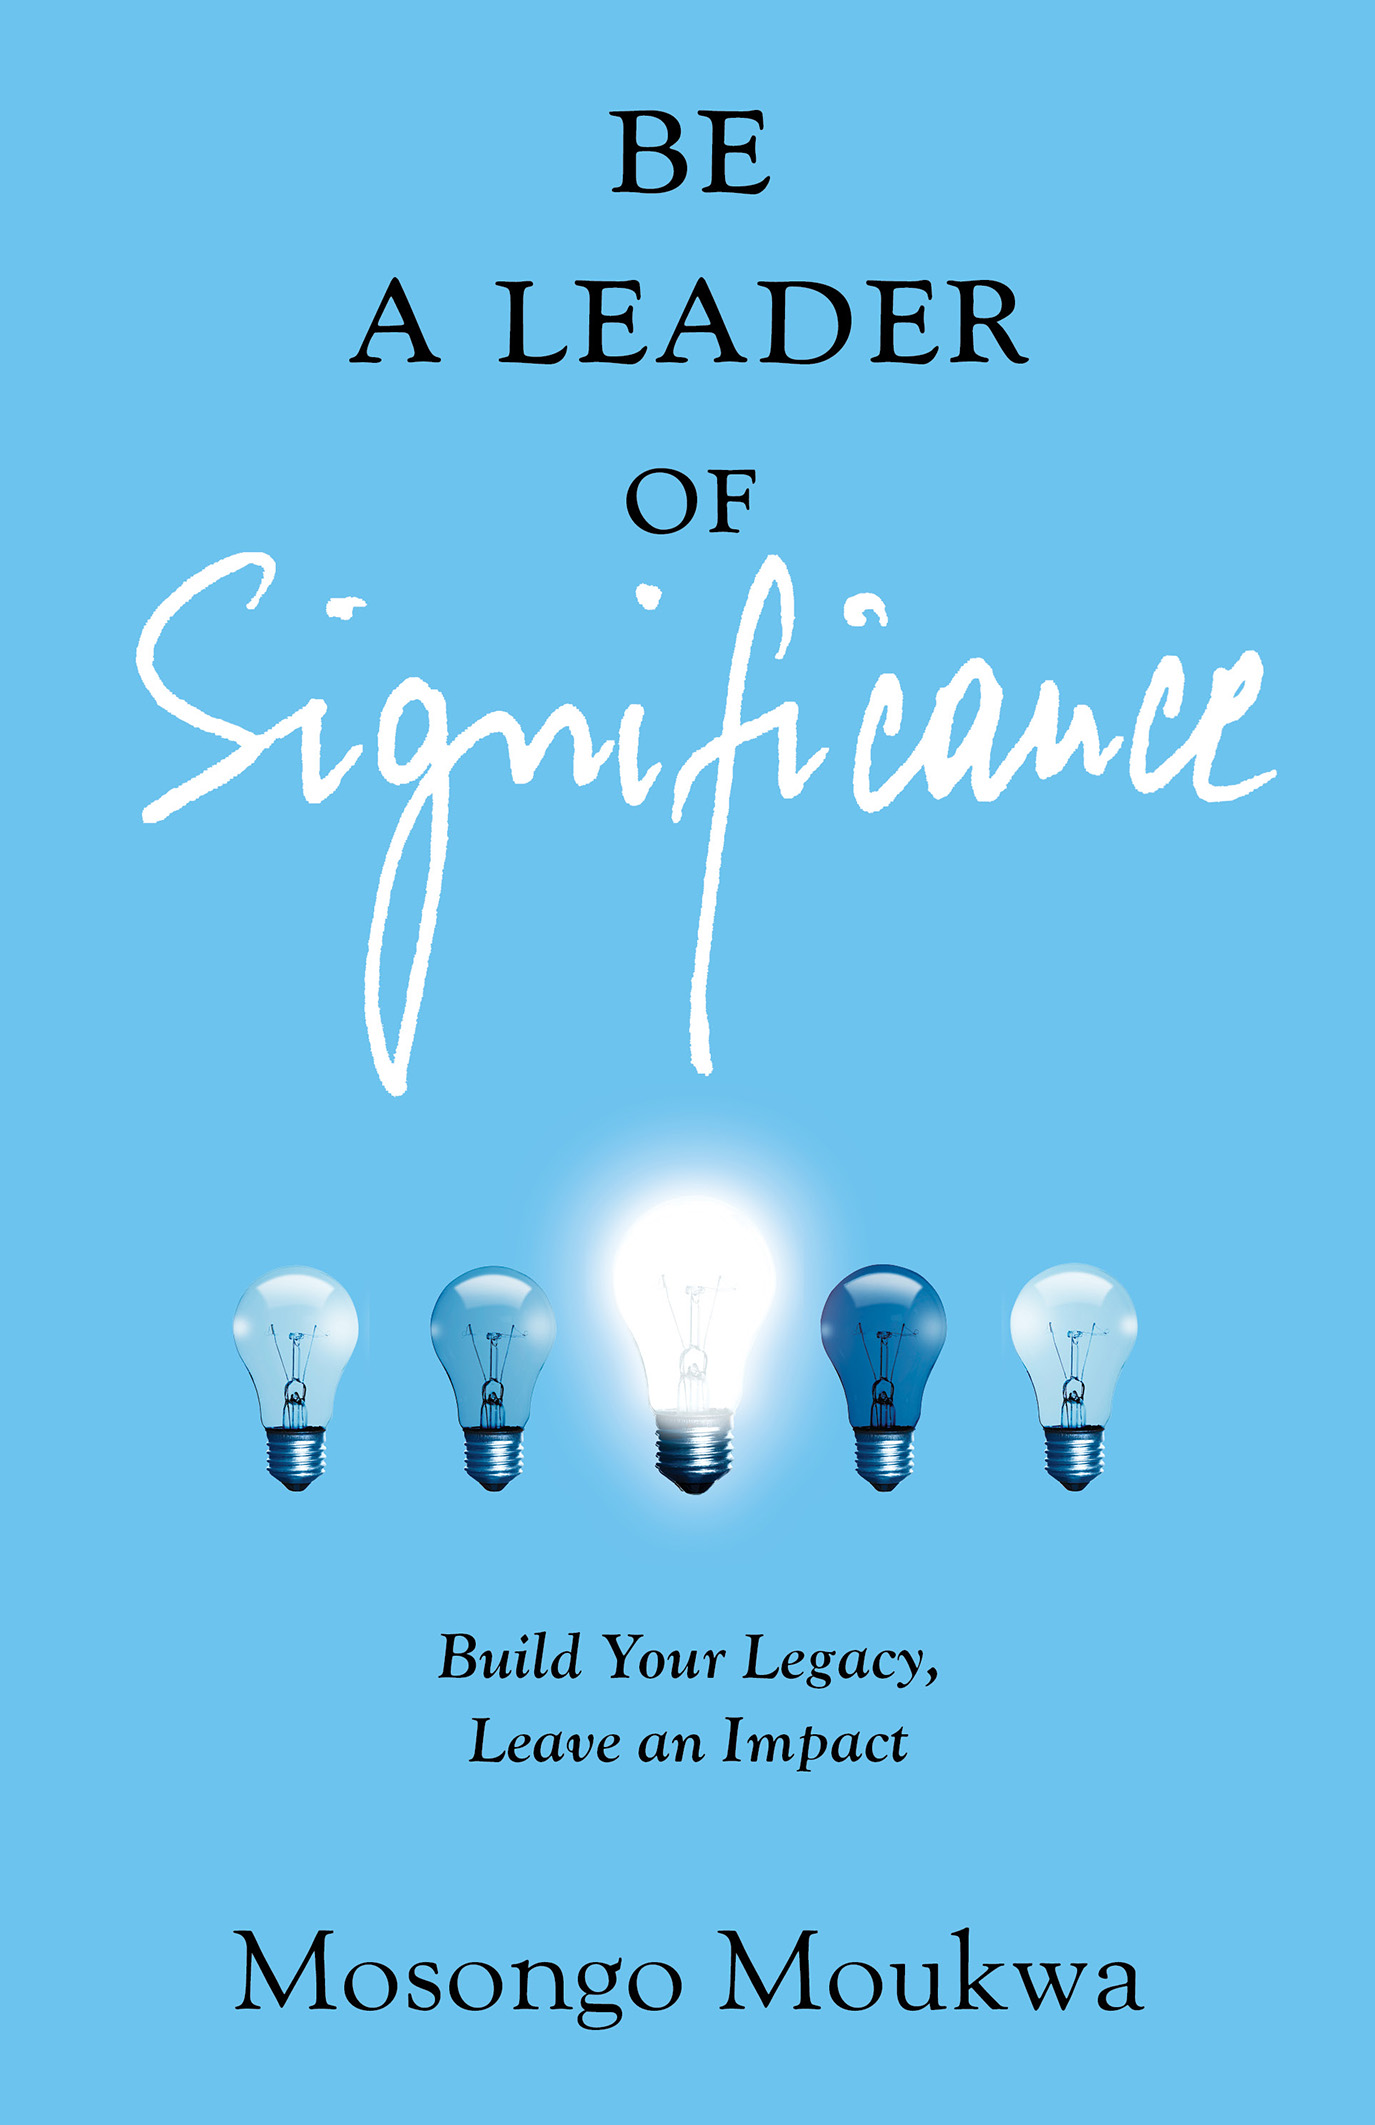 Be a Leader of Significance